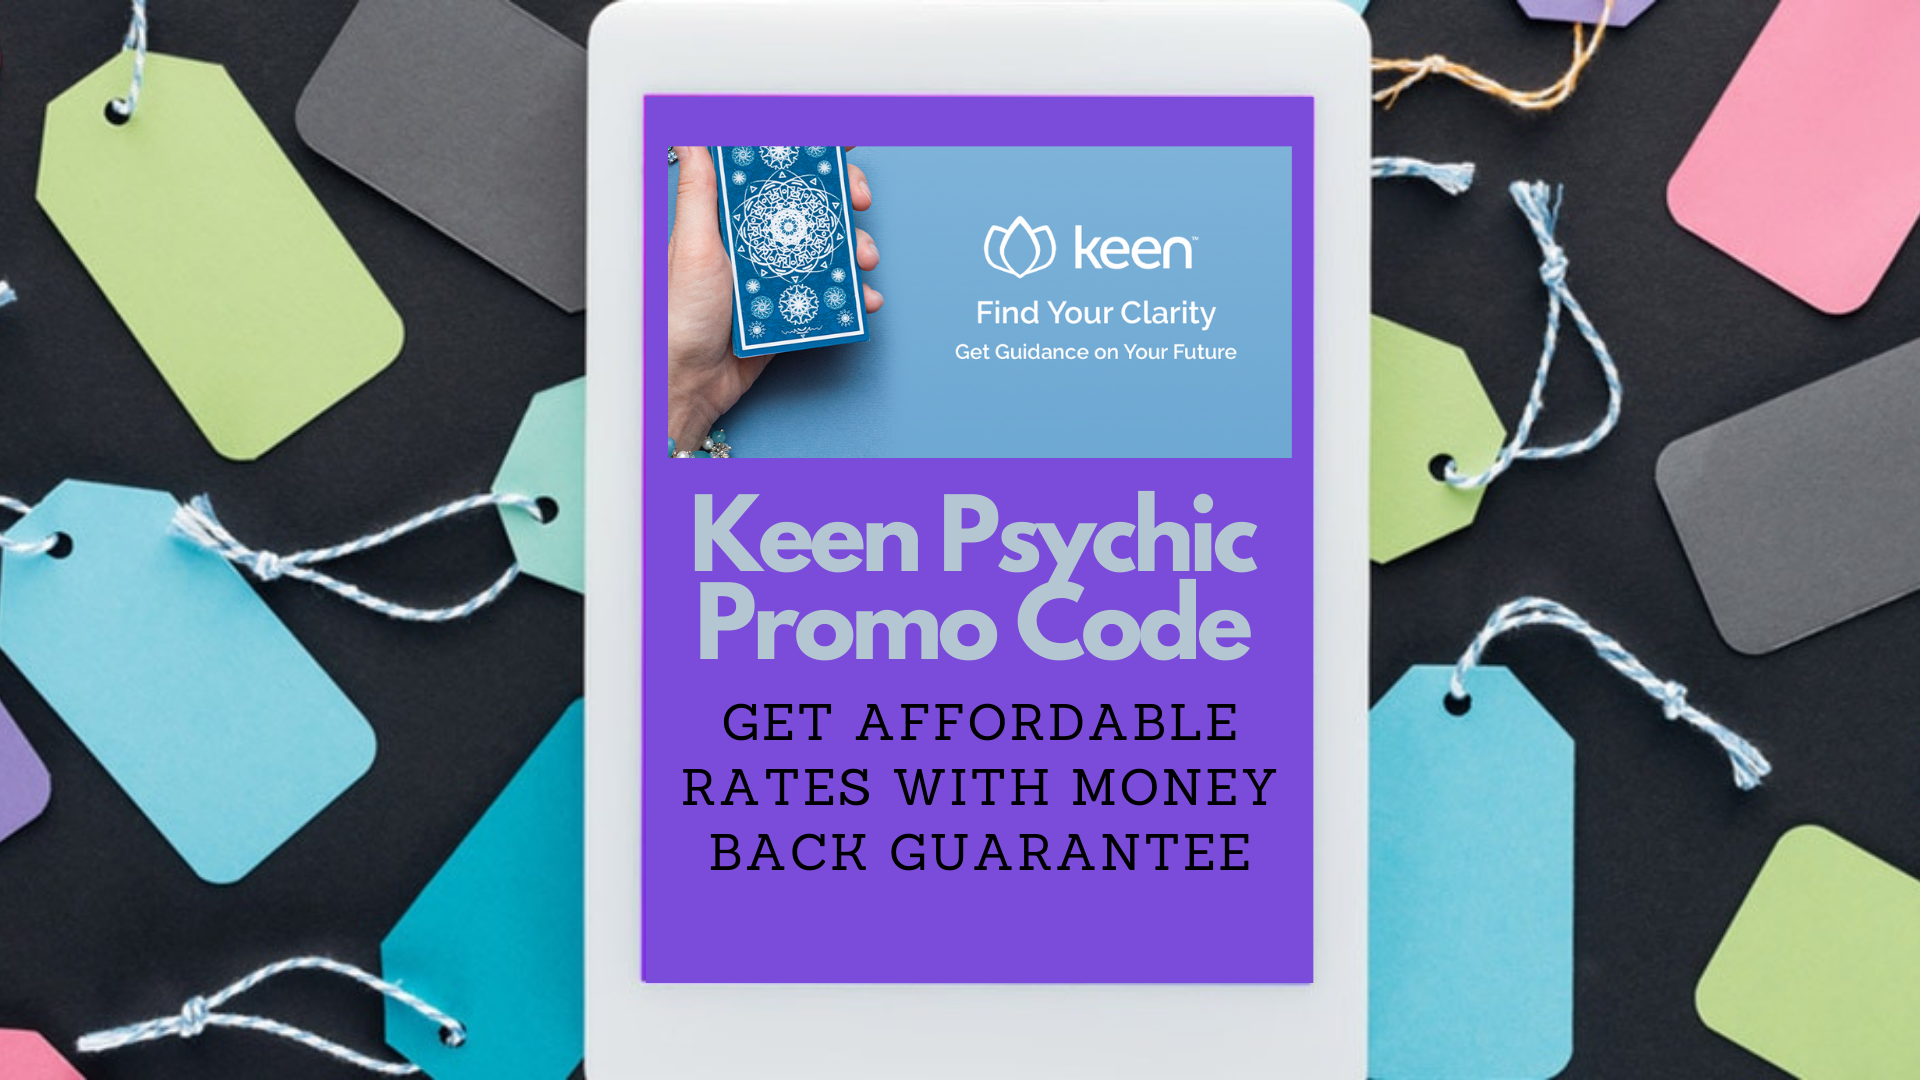 Keen Psychic Promo Code - Get Affordable Rates With Money Back Guarantee